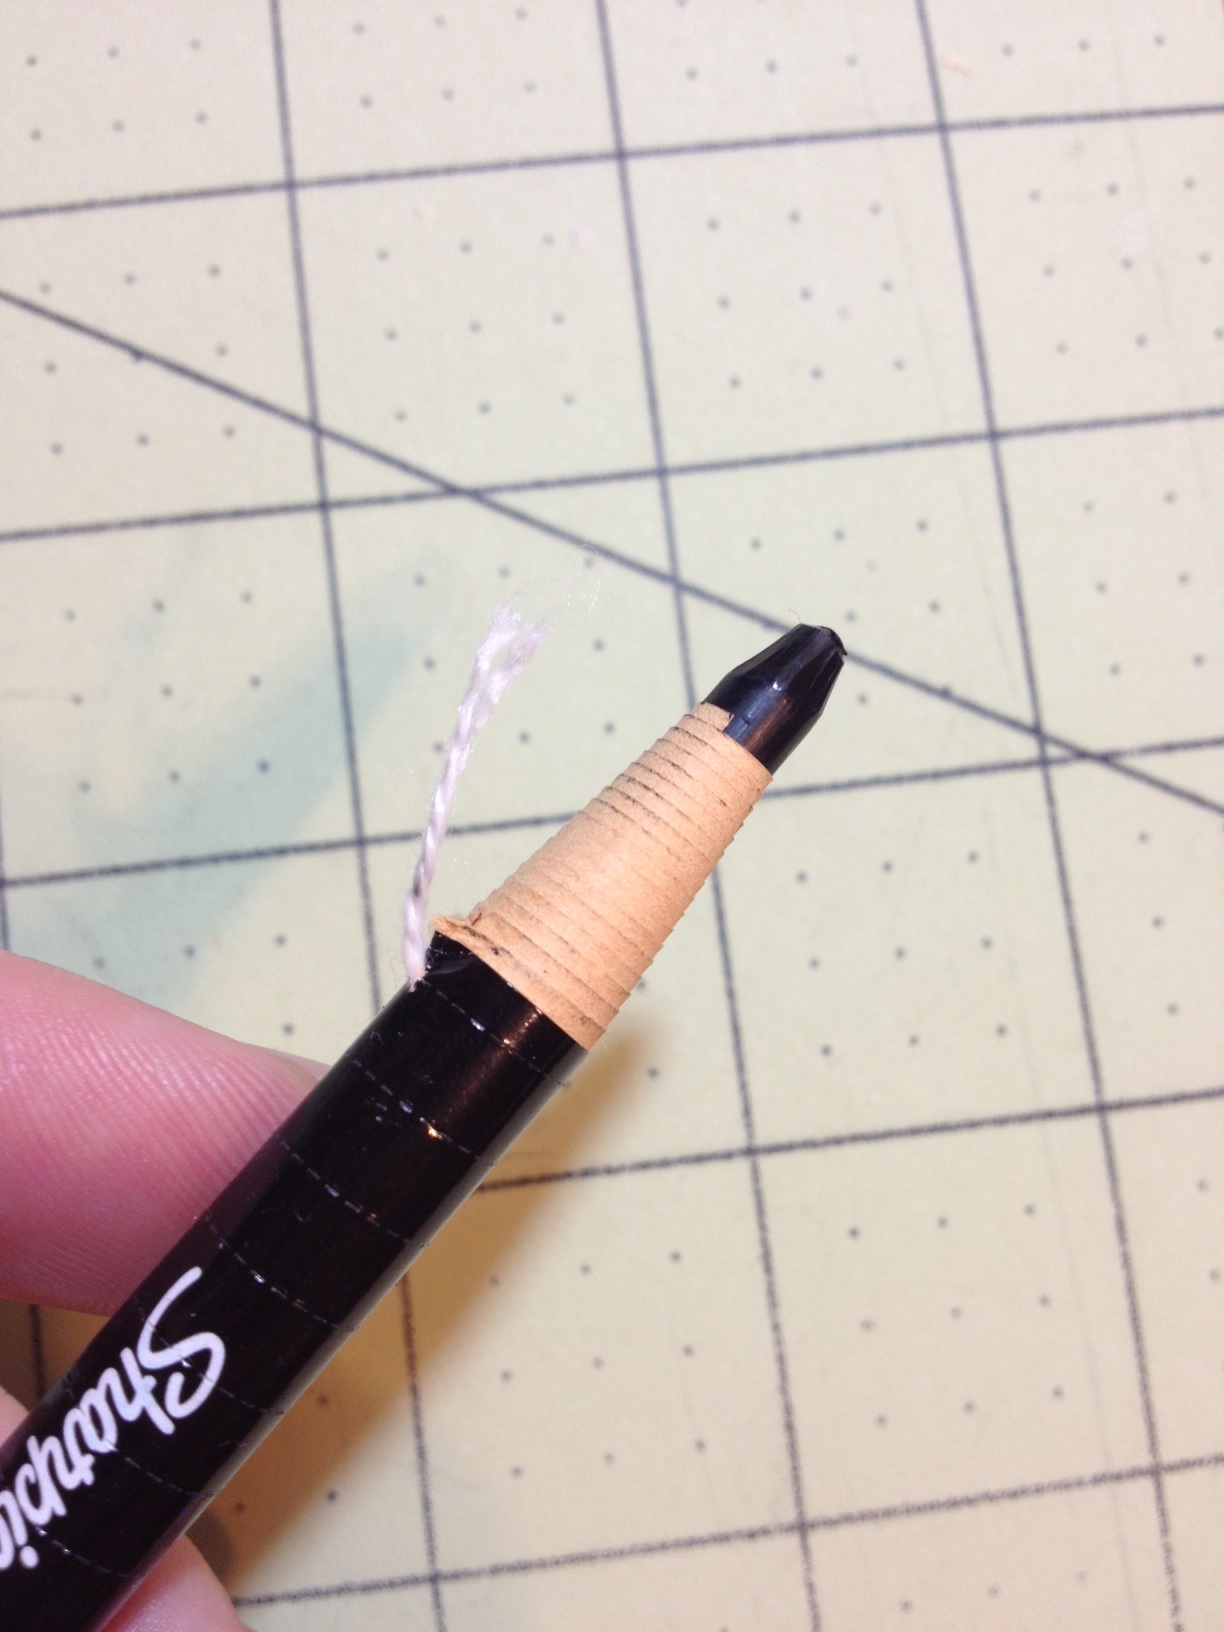 Grease Pencil  Mark on Glass with this Wax Pencil